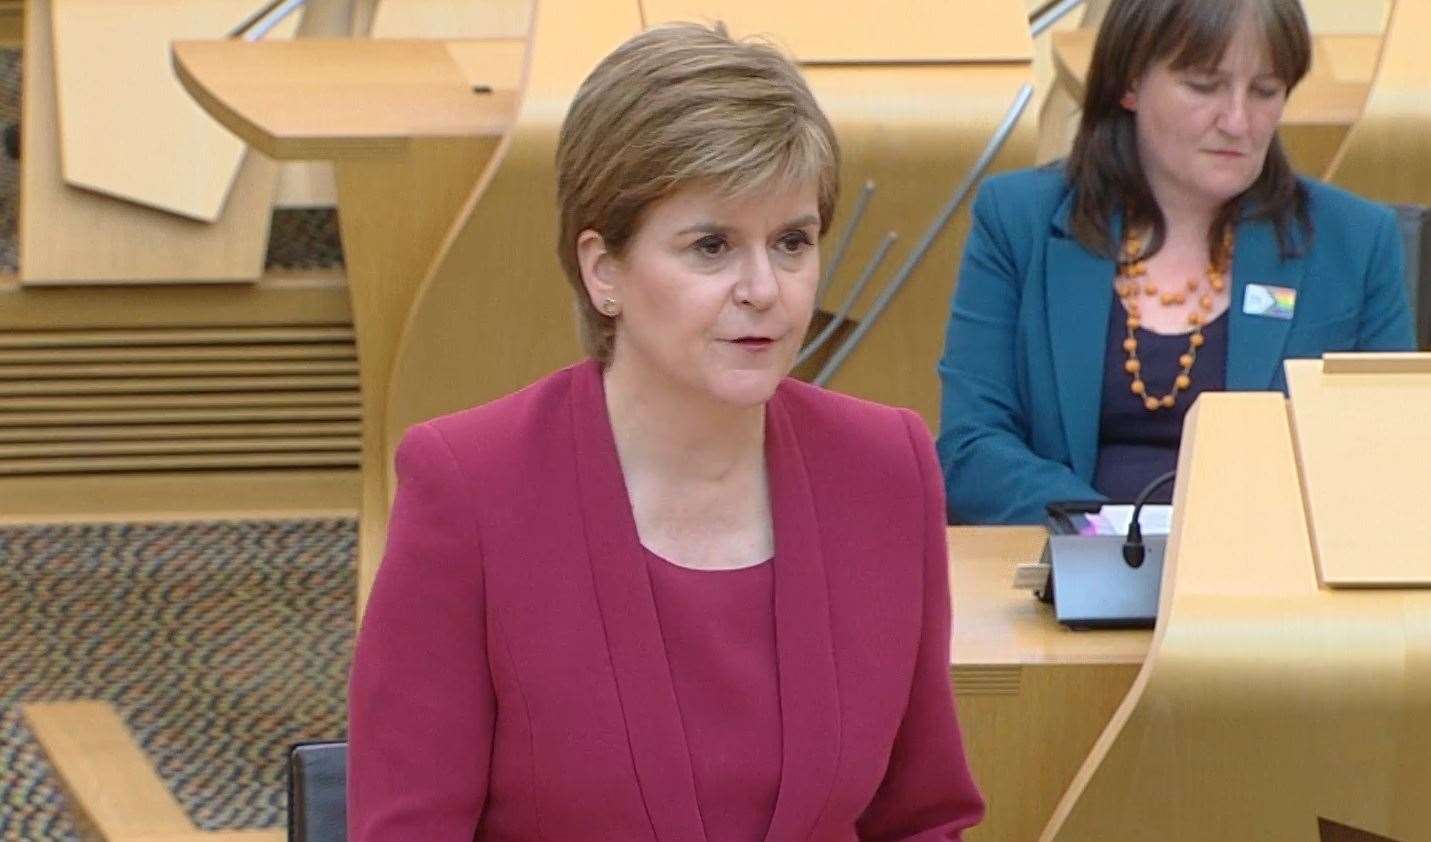 The First Minister updated parliament on the easing of restrictions.